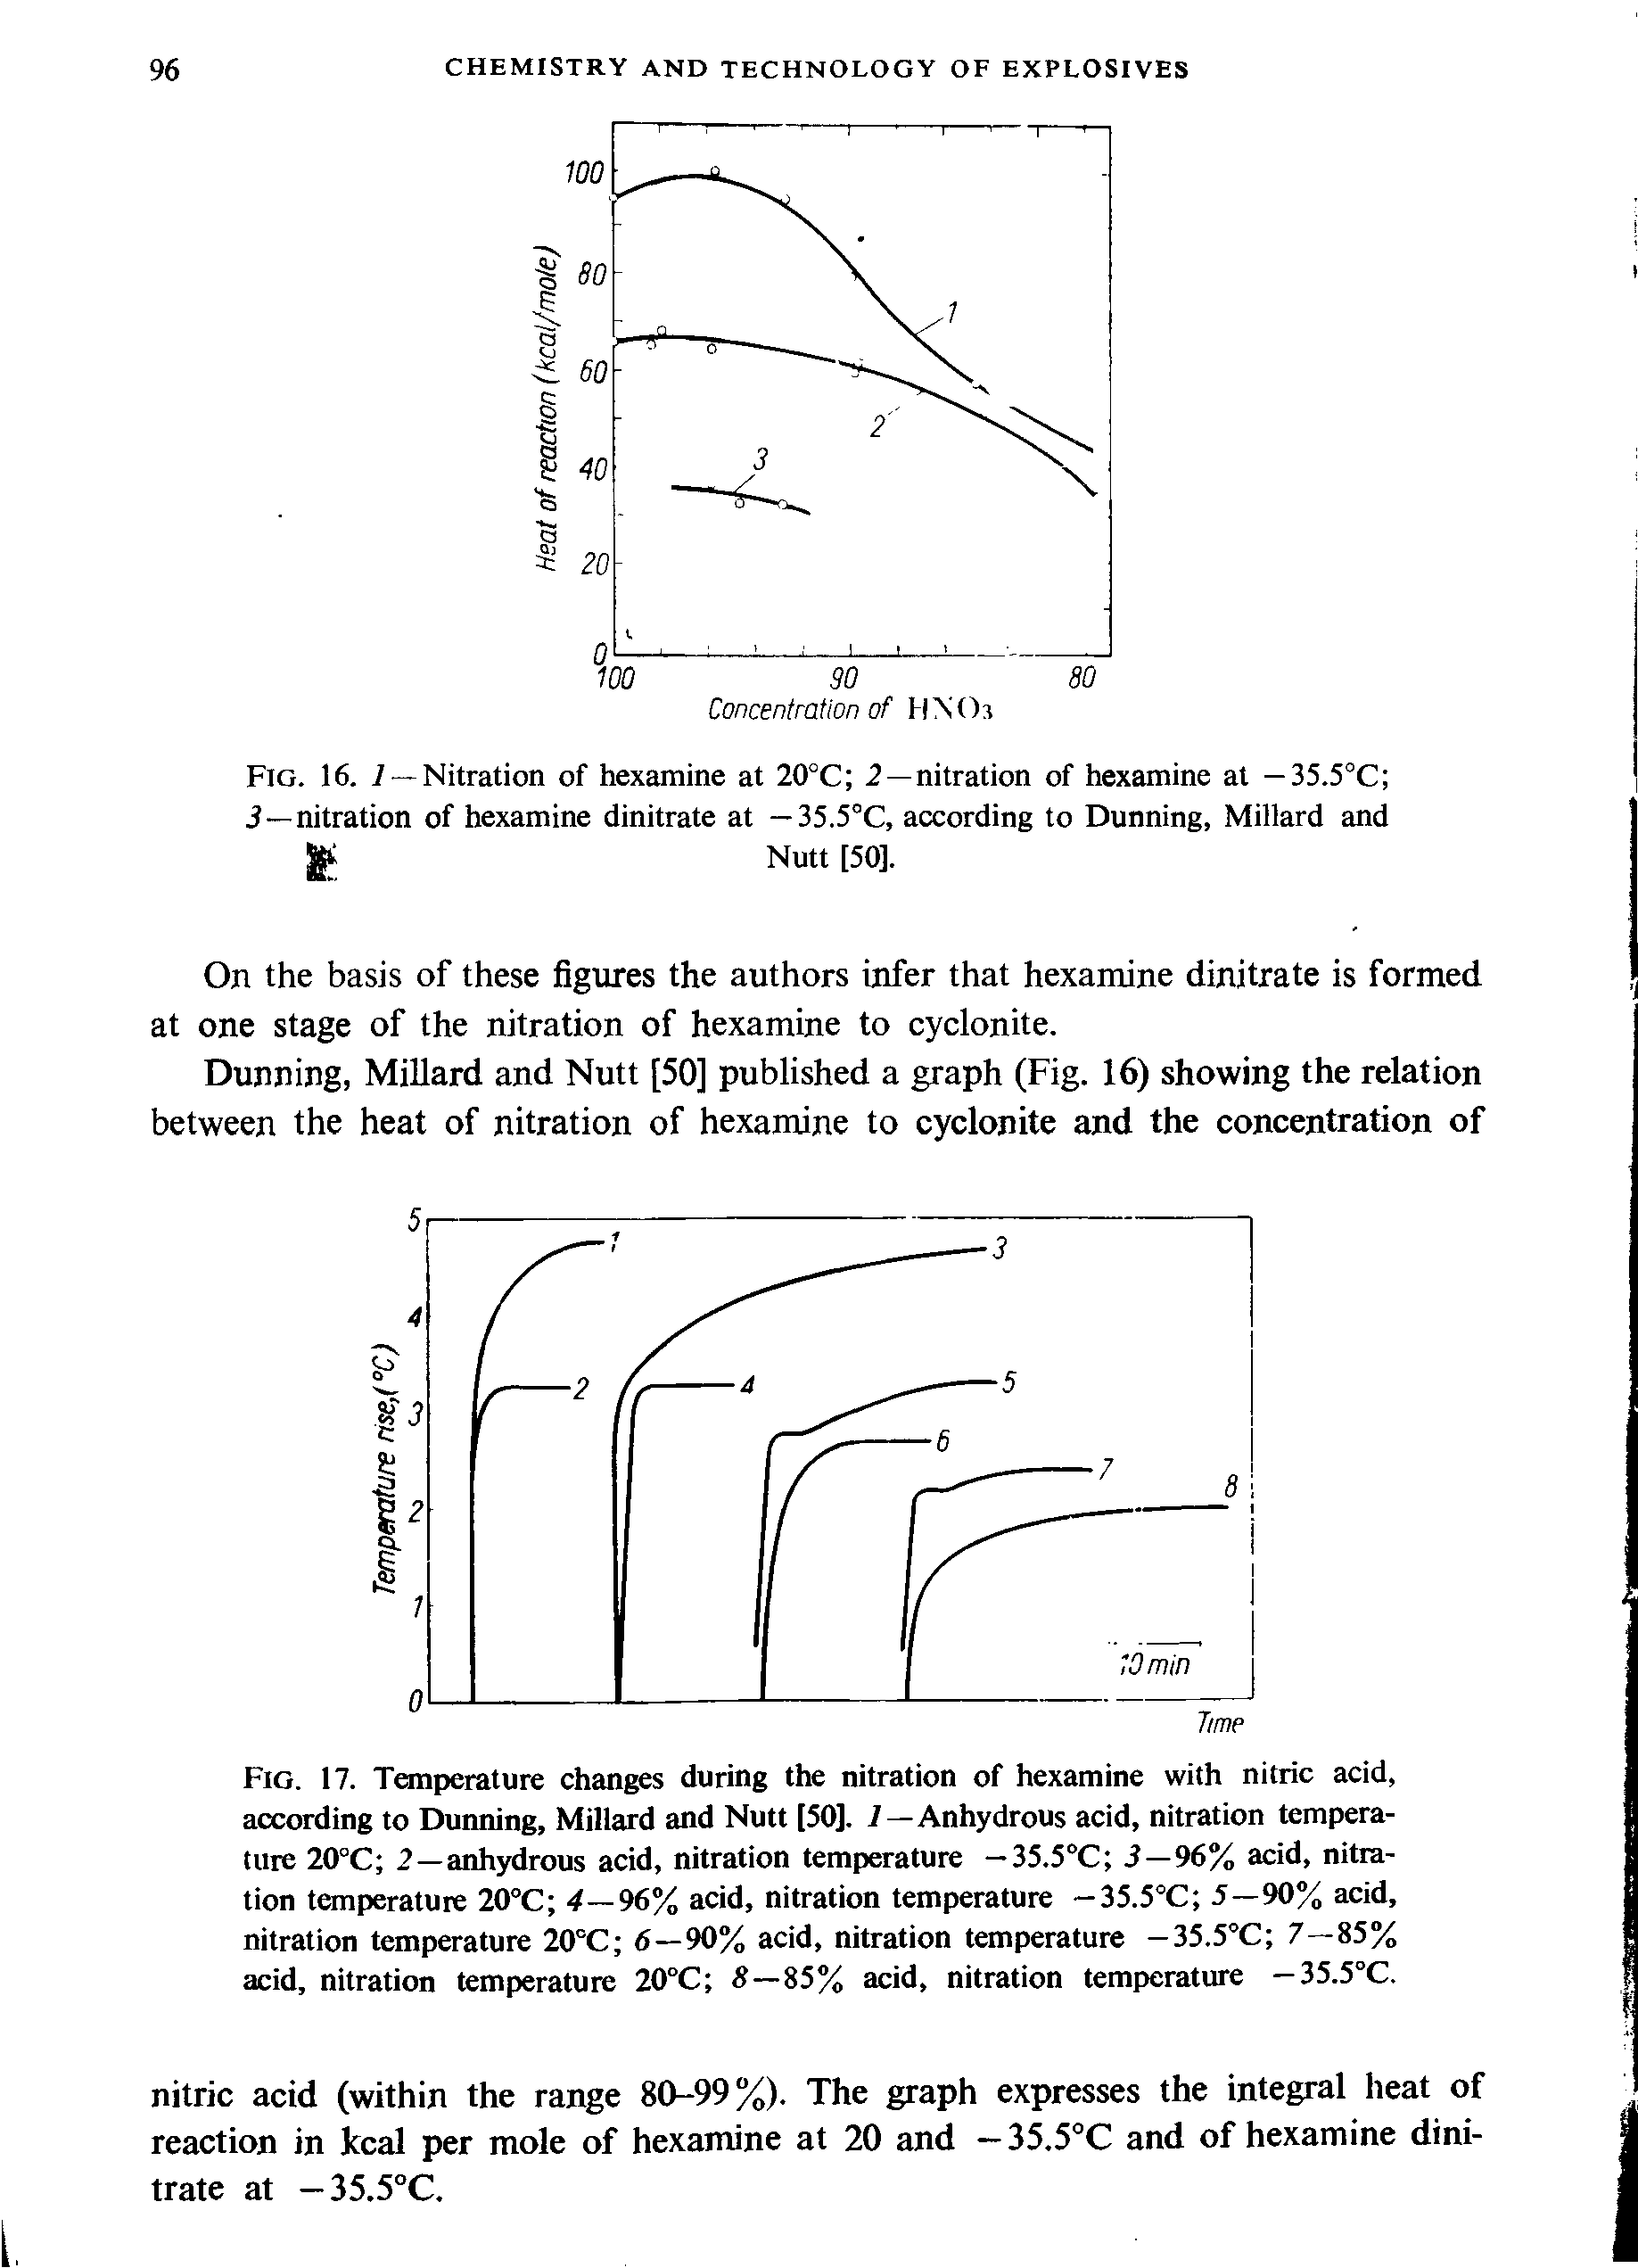 Fig. 17. Temperature changes during the nitration of hexamine with nitric acid, according to Dunning, Millard and Nutt [50], 7—Anhydrous acid, nitration temperature 20°C 2—anhydrous acid, nitration temperature —35.5°C 3—96% acid, nitration temperature 20°C 4—96% acid, nitration temperature —35.5°C 5—90% acid, nitration temperature 20°C 6—90% acid, nitration temperature —35.5°C 7—85% acid, nitration temperature 20°C —85% acid, nitration temperature —35.5°C.